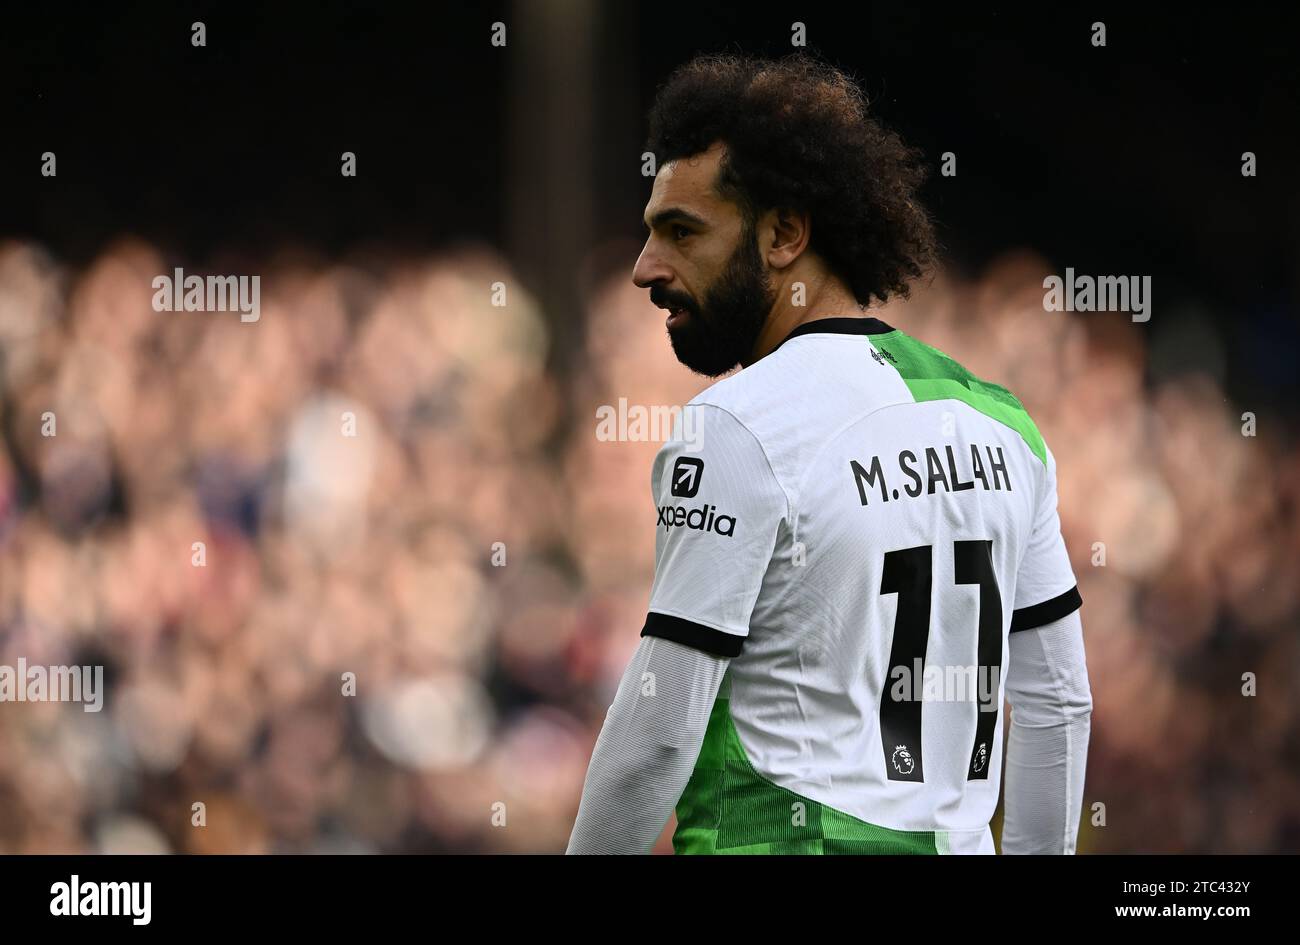 LONDON, ENGLAND - DECEMBER 9: Mohamed Salah of Liverpool FC during the Premier League match between Crystal Palace and Liverpool FC at Selhurst Park o Stock Photo